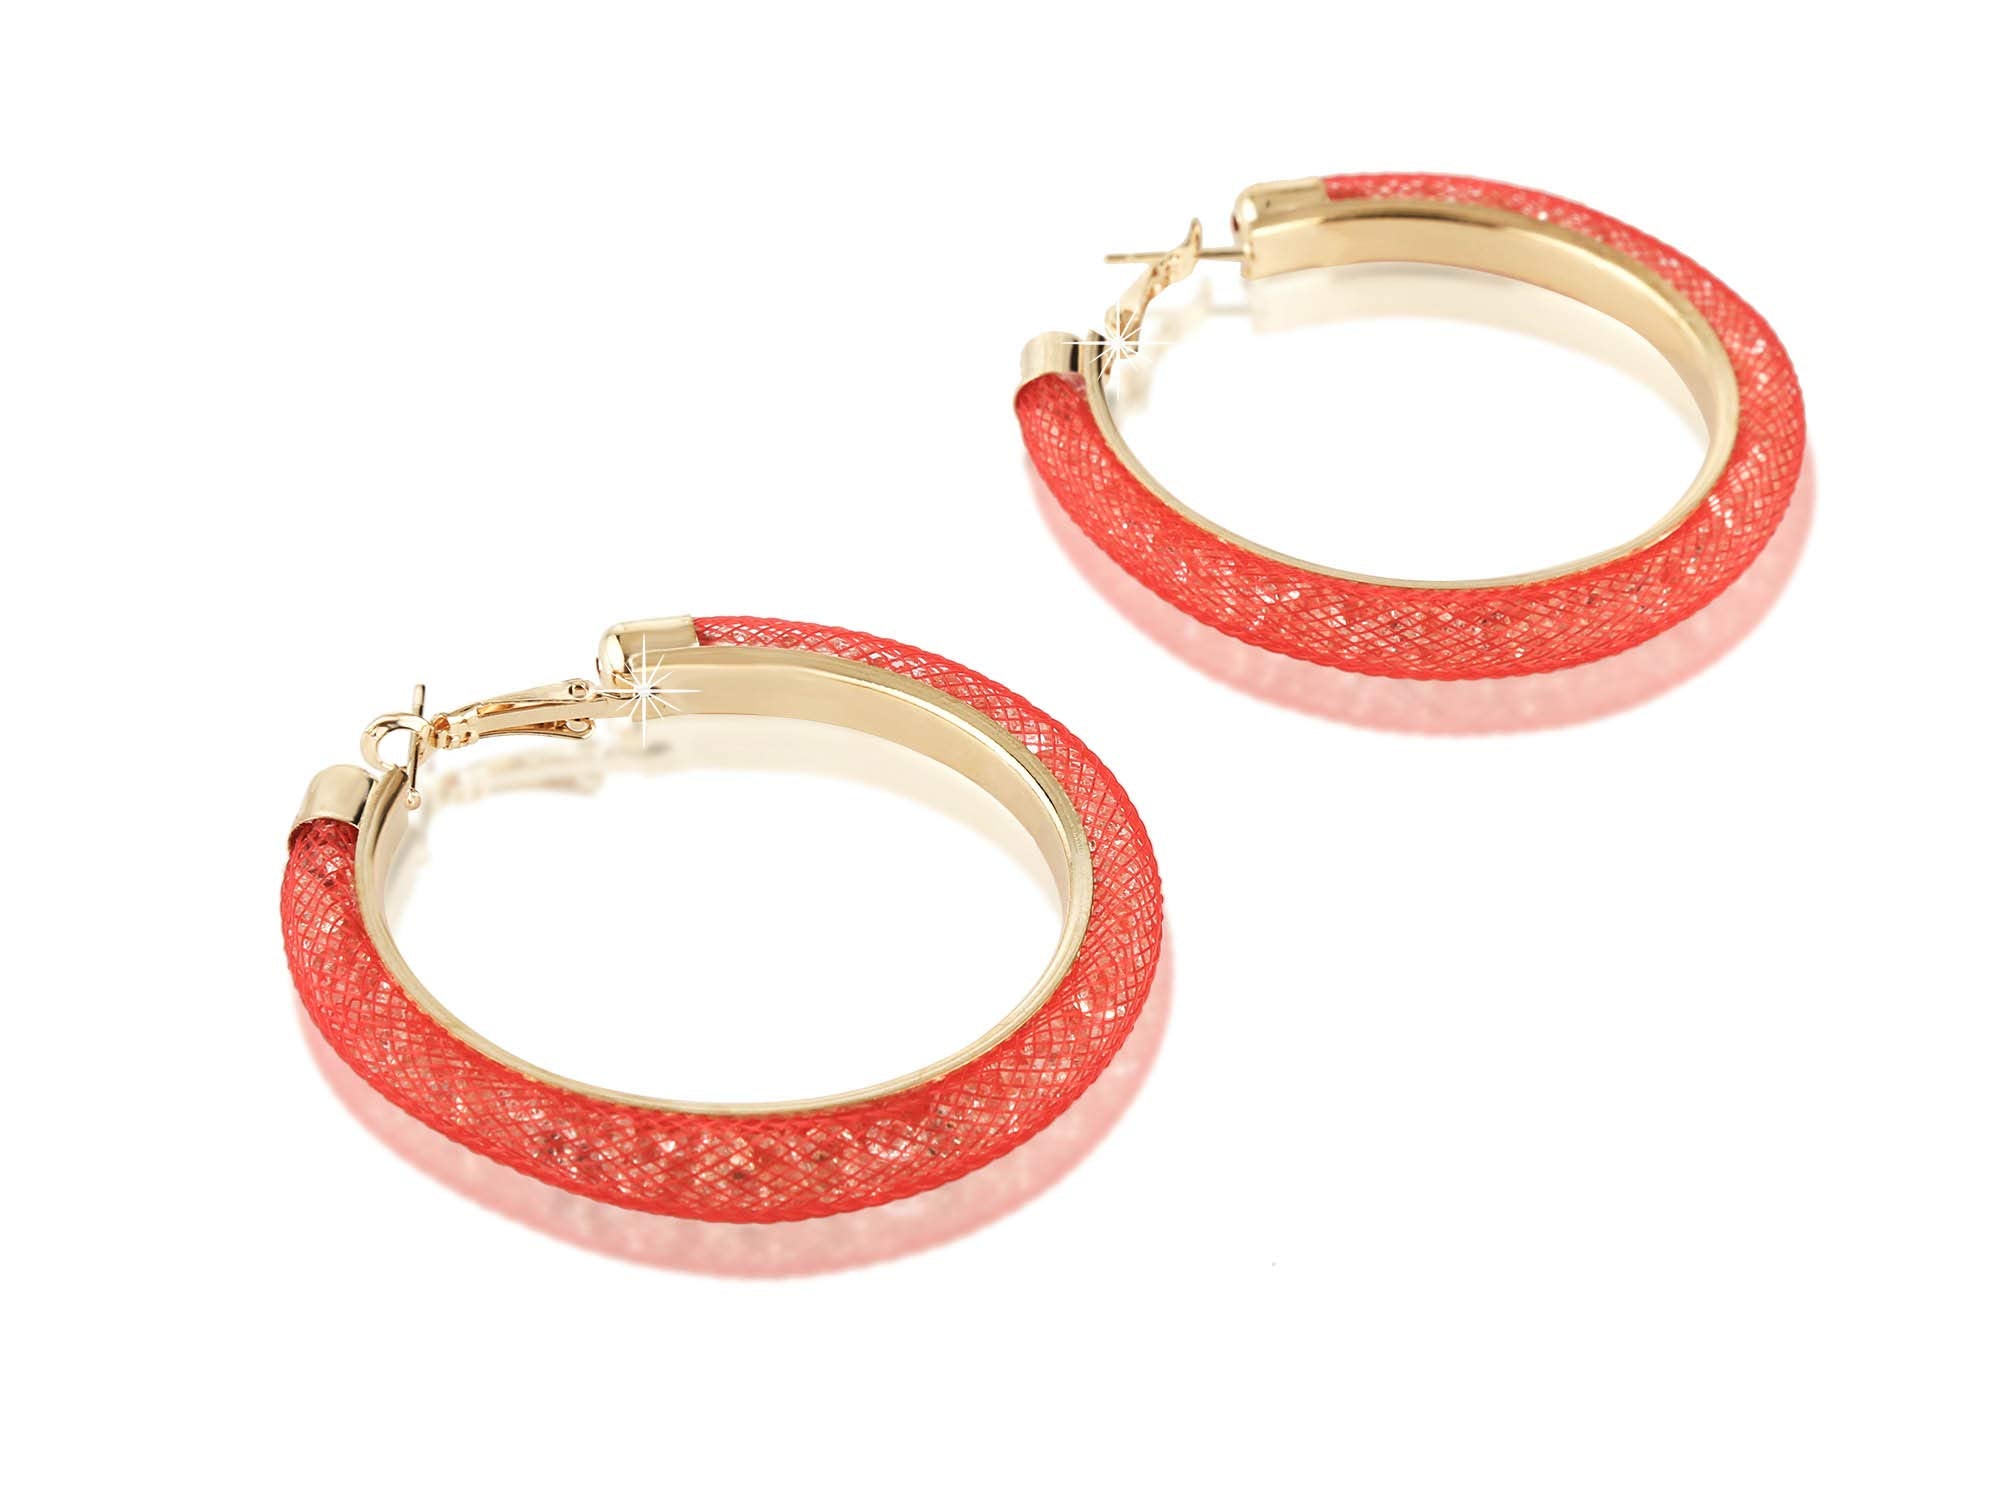 Yellow Chimes Exclusive Crystal-Filled Stylish Fashion Hoops Earrings for Women and Girls (Reddish Peach)